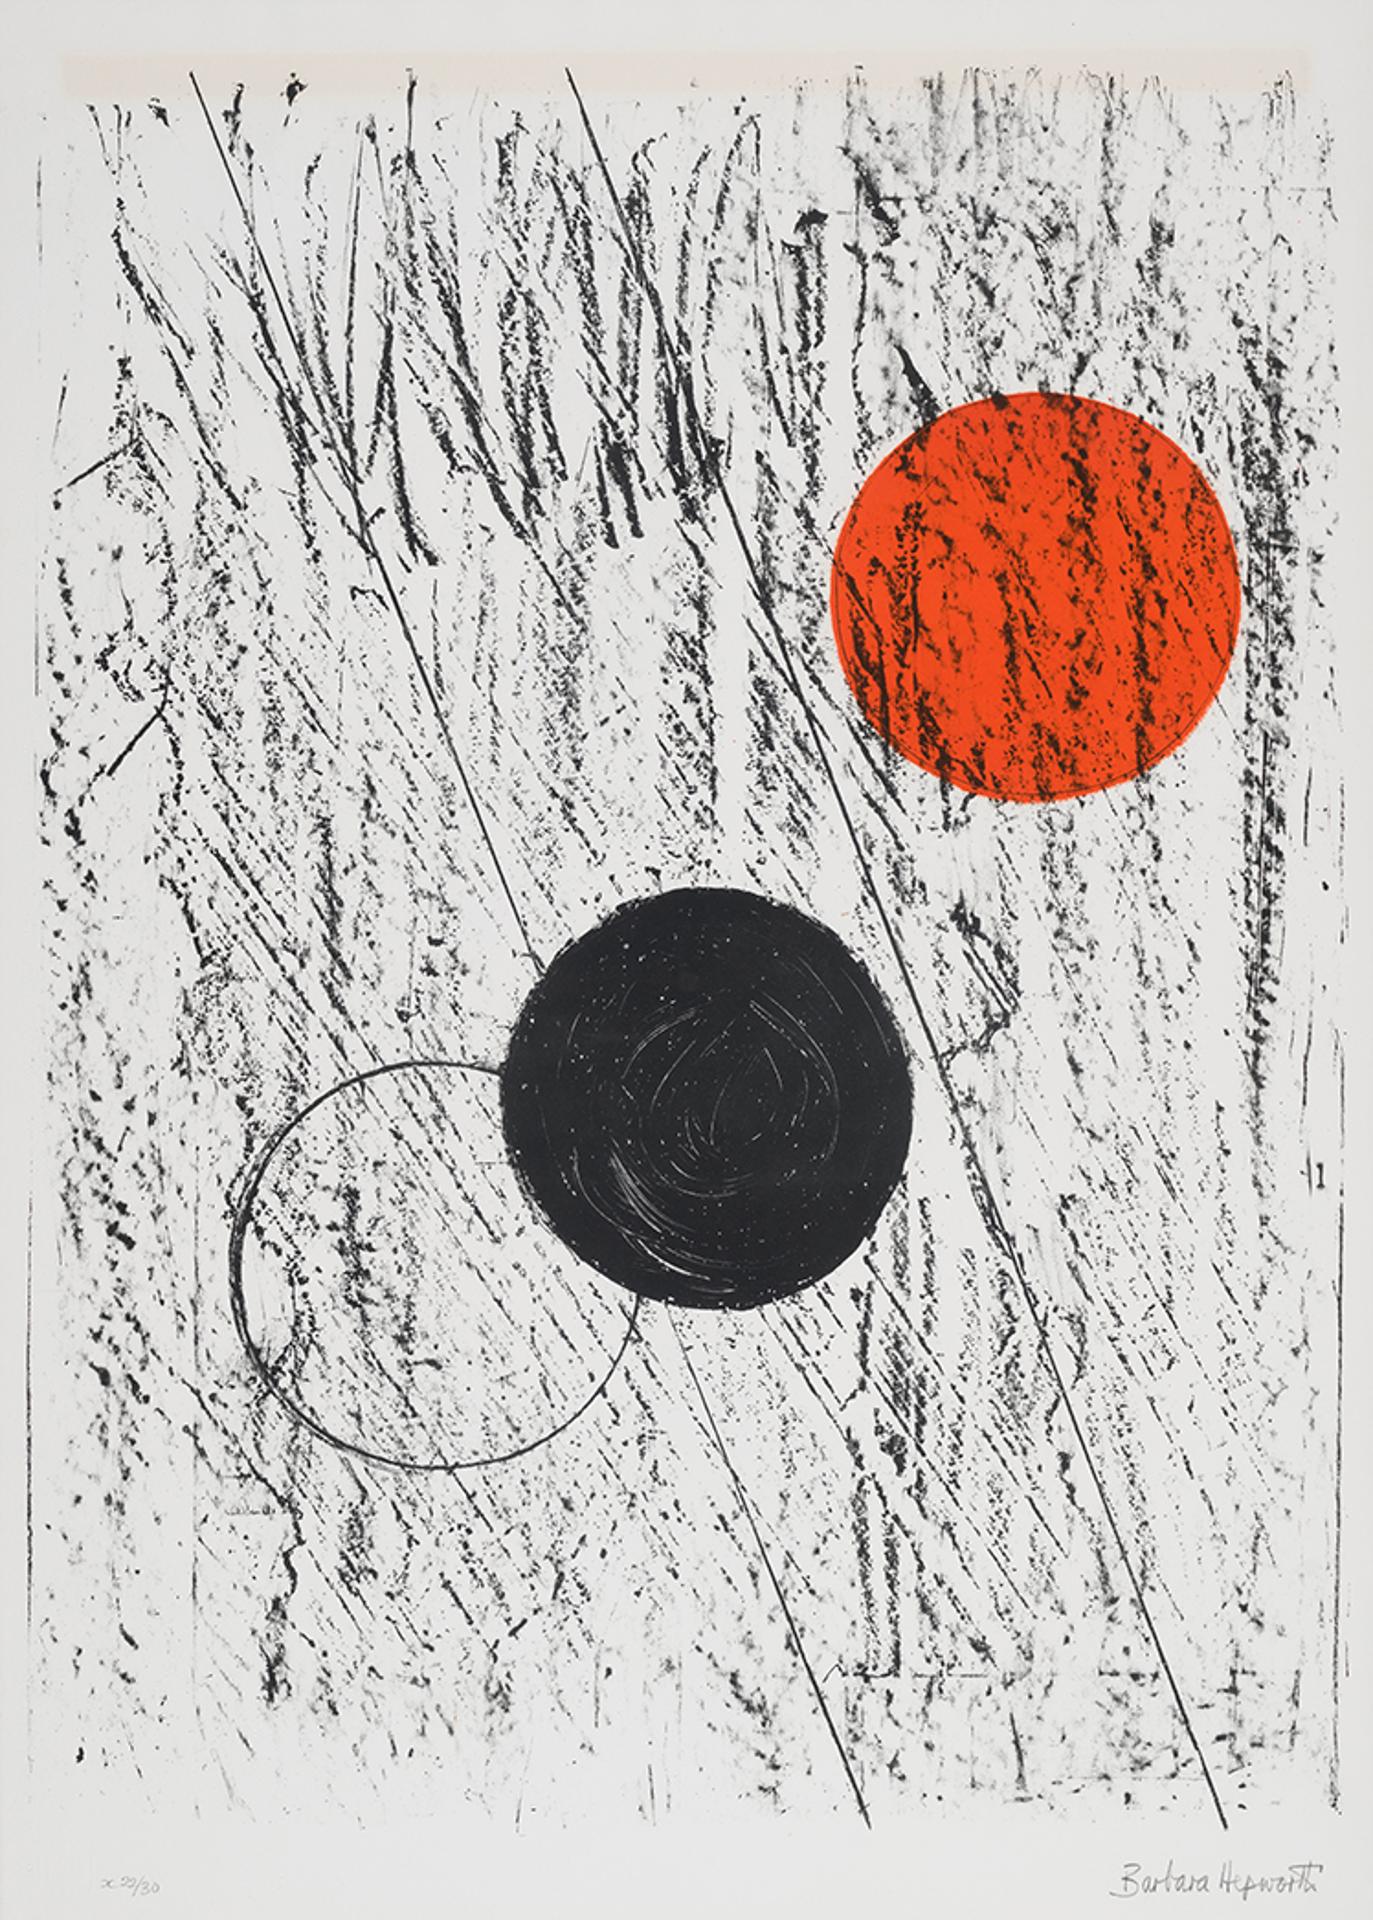 Barbara Hepworth (1903-1975) - Sun and Moon (from Twelve Lithographs)